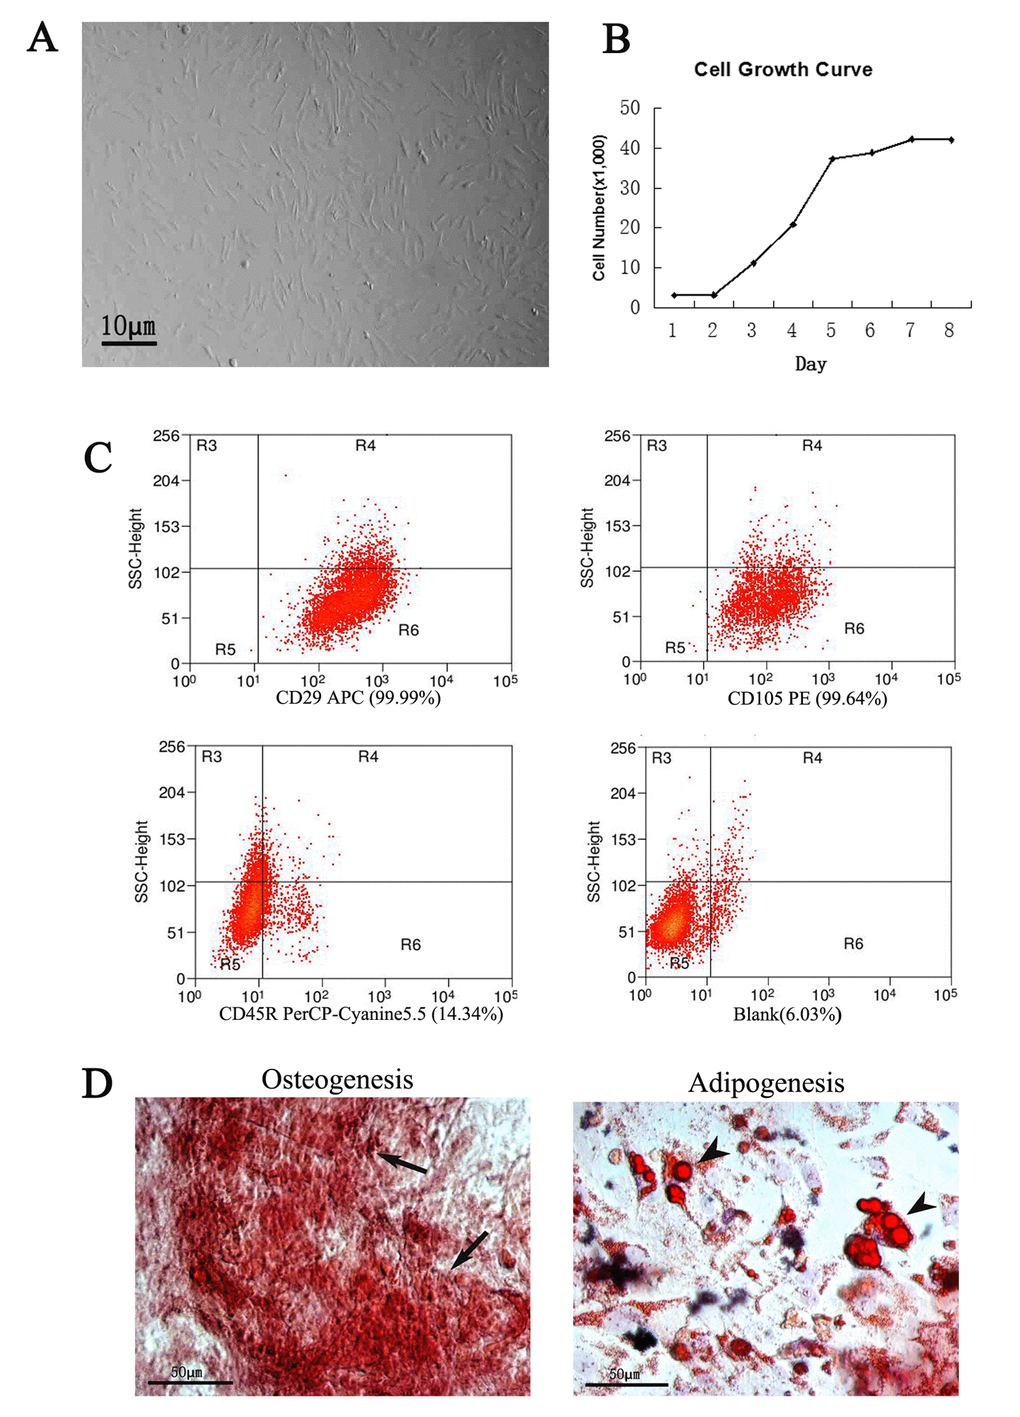 Culture and identification of ADSCs. The ADSCs exhibited typical fibroblastic morphology (A) and normal cell growth curve (B), bar=10μm. (C) Flow cytometric analysis of ADSCs. Compared to the positive rate of blank control group (6.03%), the cells were positive expression of CD29 (99.99%), CD105 (99.64%) and negative expression of CD45R (14. 34%). (D) Identification of ADSCs through osteogenesis and adipogenesis. The ADSCs differentiate into osteoblasts and adipocytes. Arrows indicate osteoblasts, arrowheads indicate adipocytes.